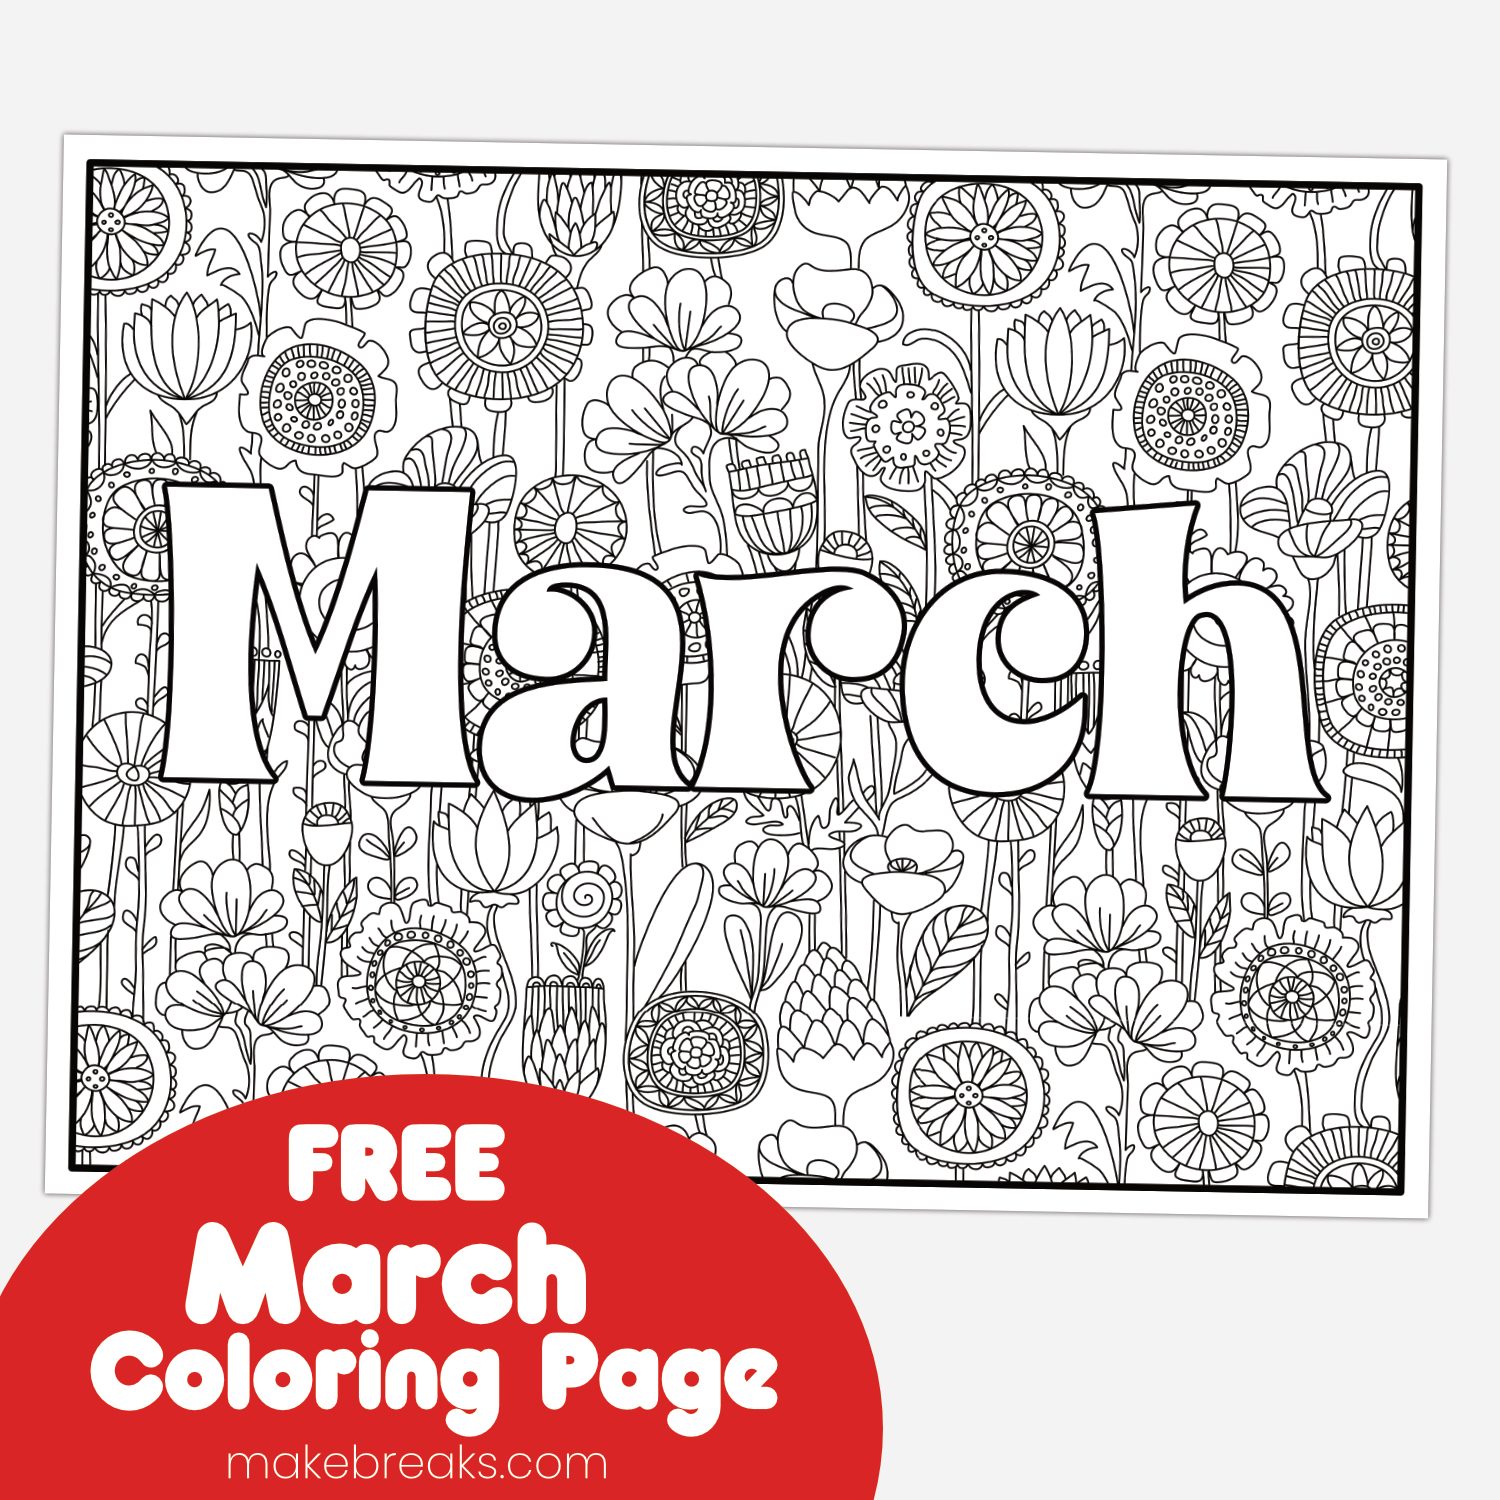 Free March Coloring Page